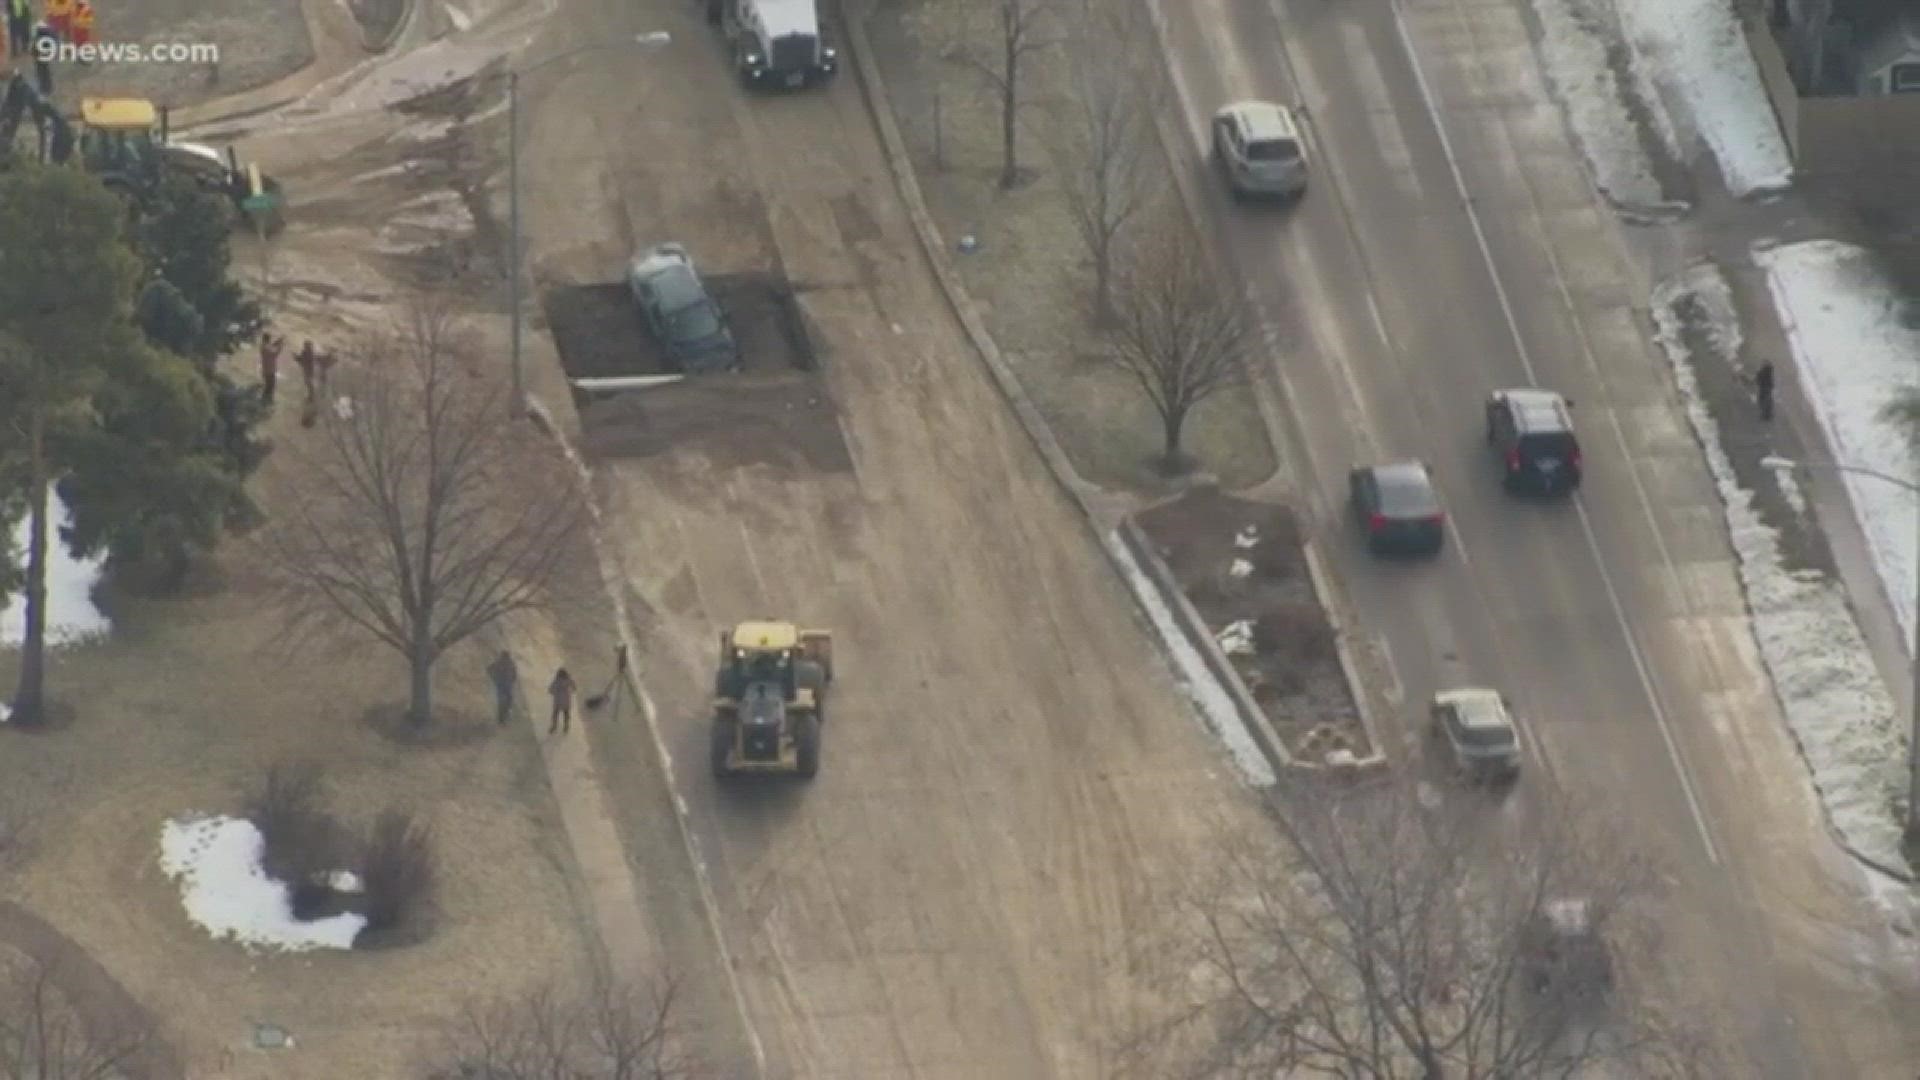 SKY9 over the area where a man drove into a hole that was part of a water main break repair.